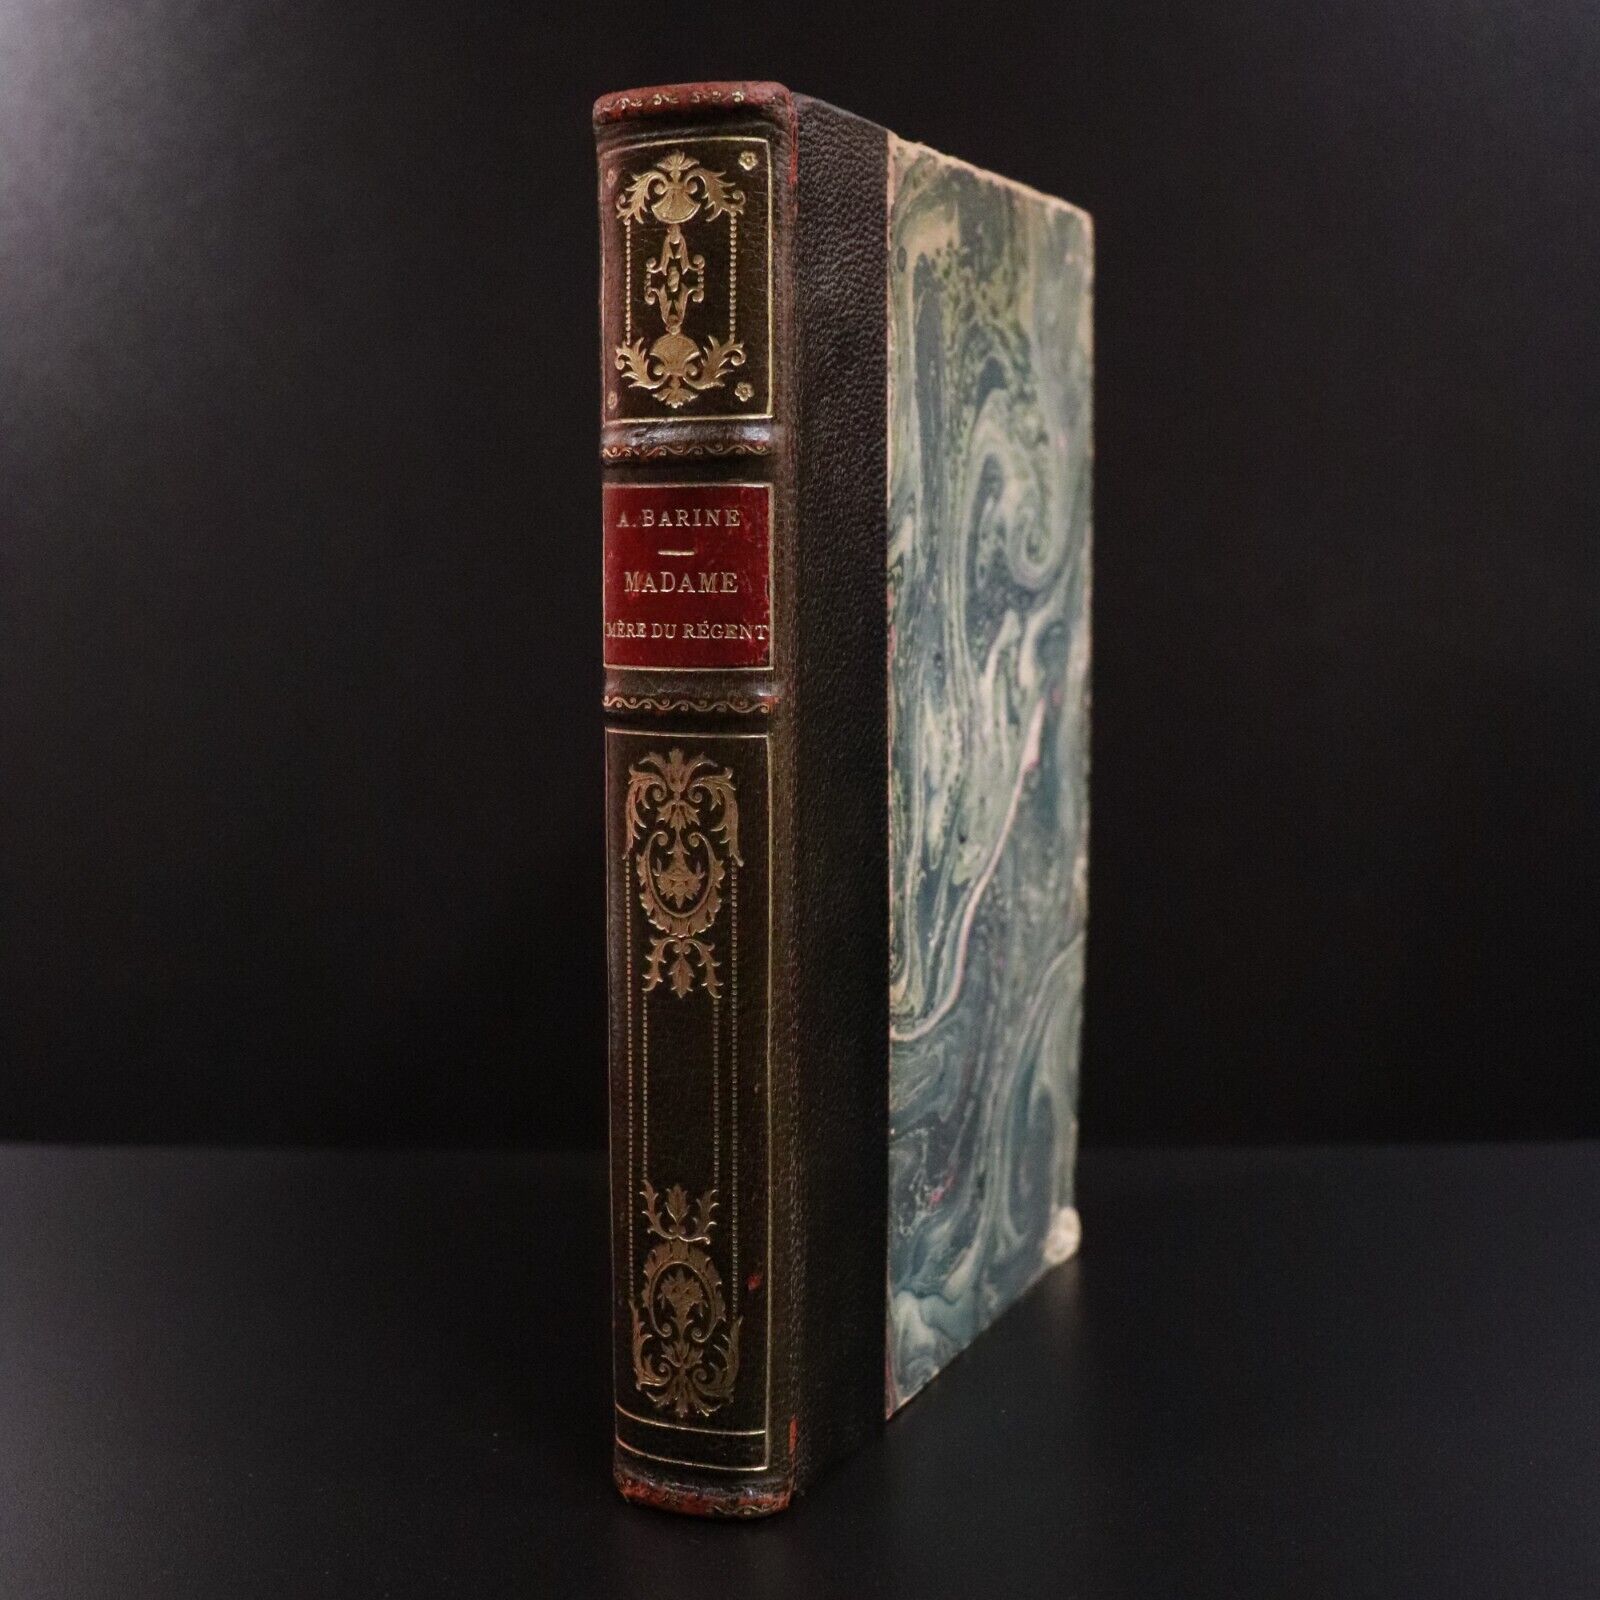 1923 Madame Mere Du Regent by Arvede Barine French History Book Fine Binding